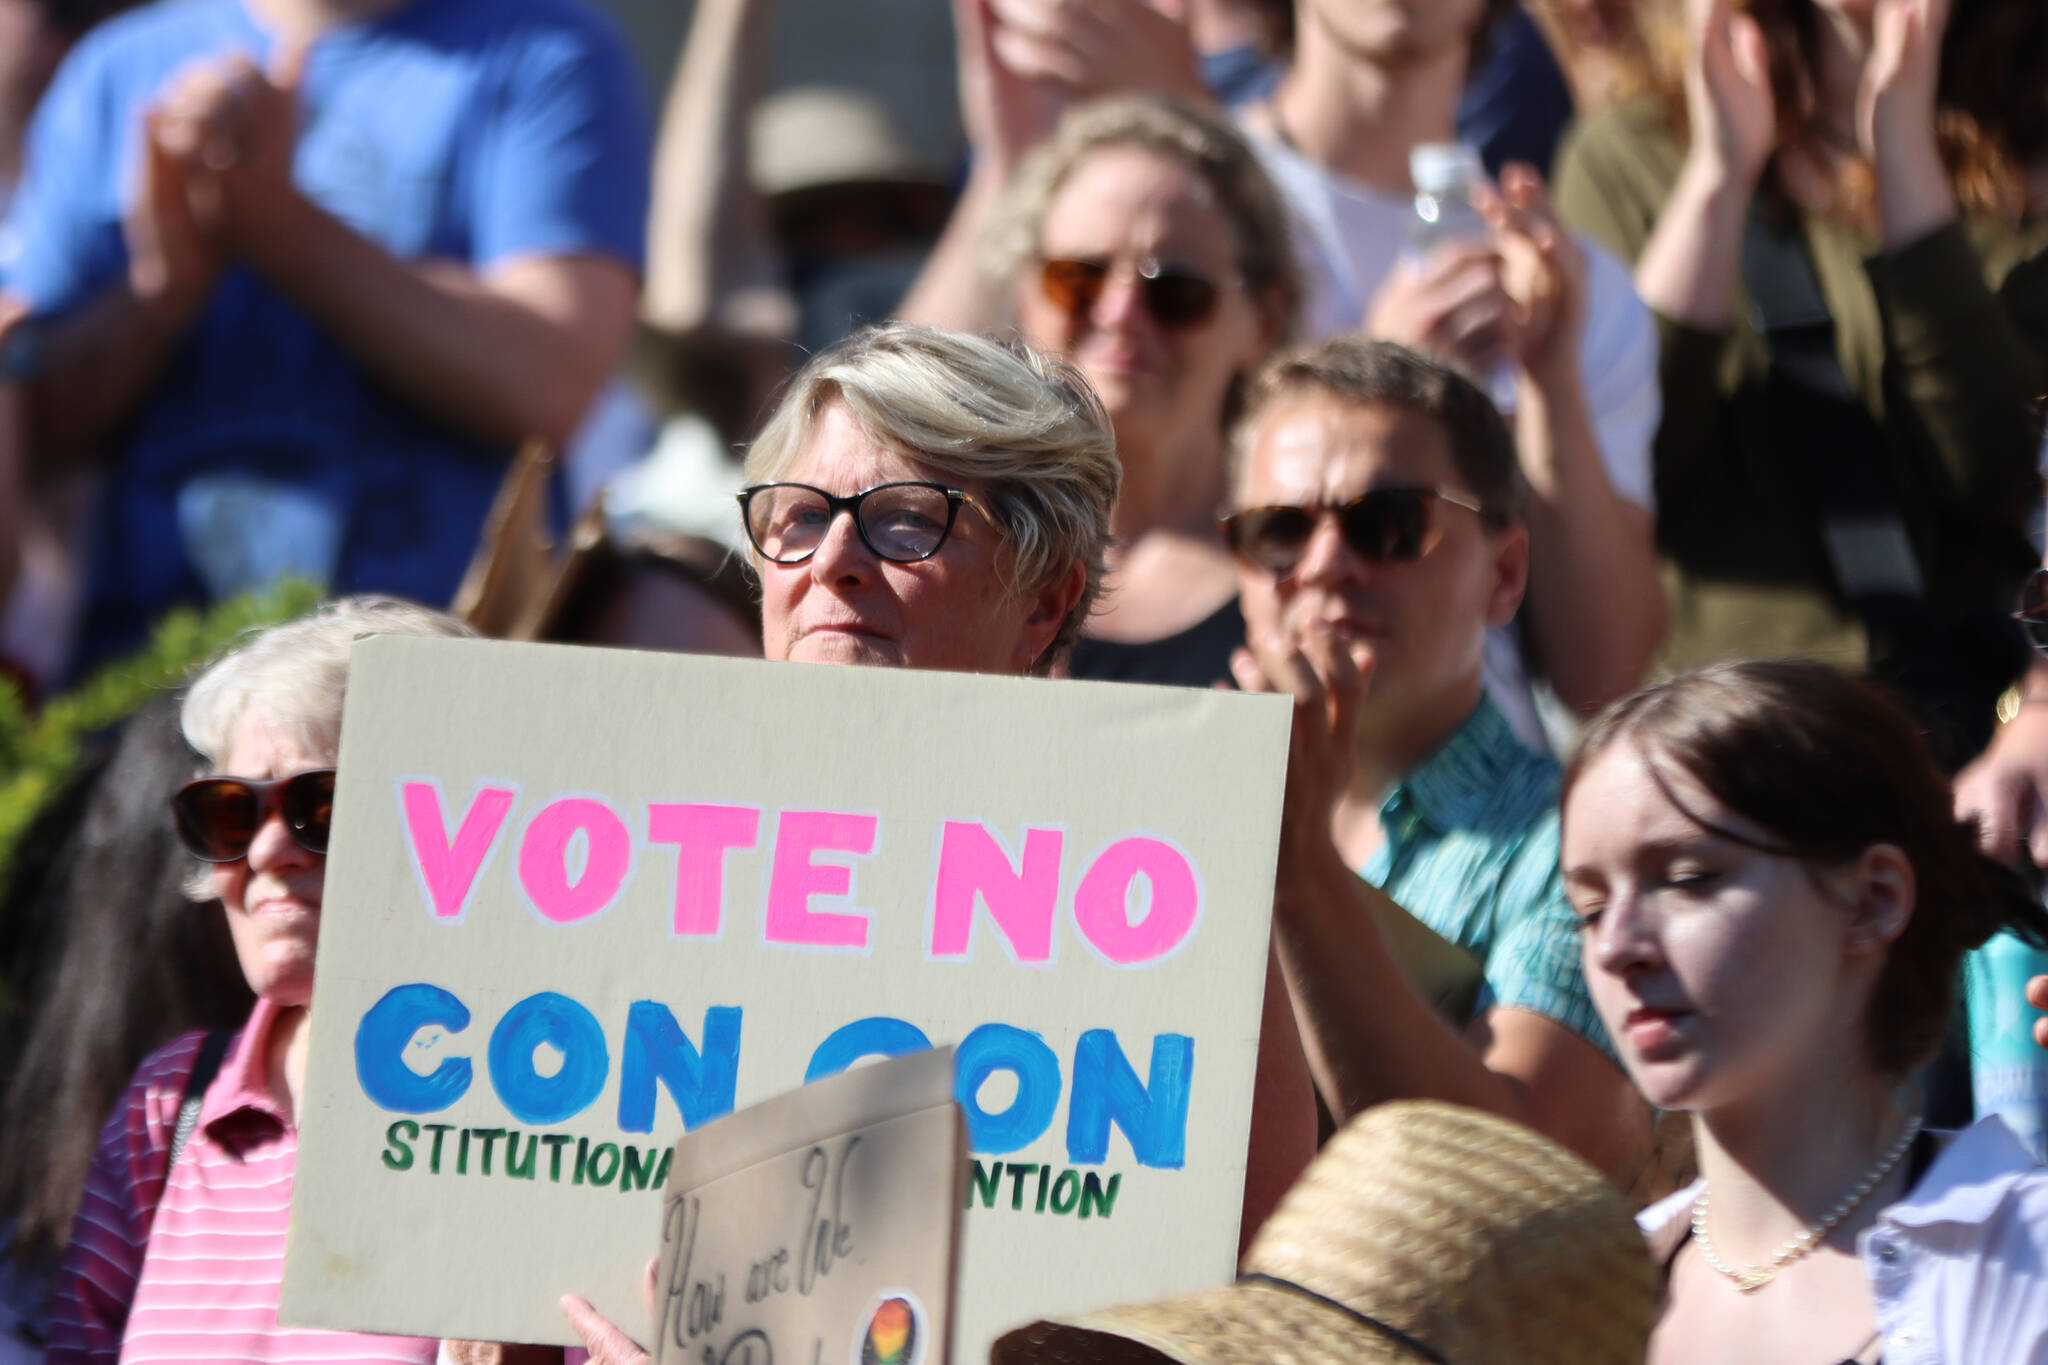 Former Democratic state Rep. Beth Kerttula holds up a sign reading “Vot No Con Con,” during a rally at the Dimond Courthouse Plaza in Juneau. (Ben Hohenstatt / Juneau Empire File)